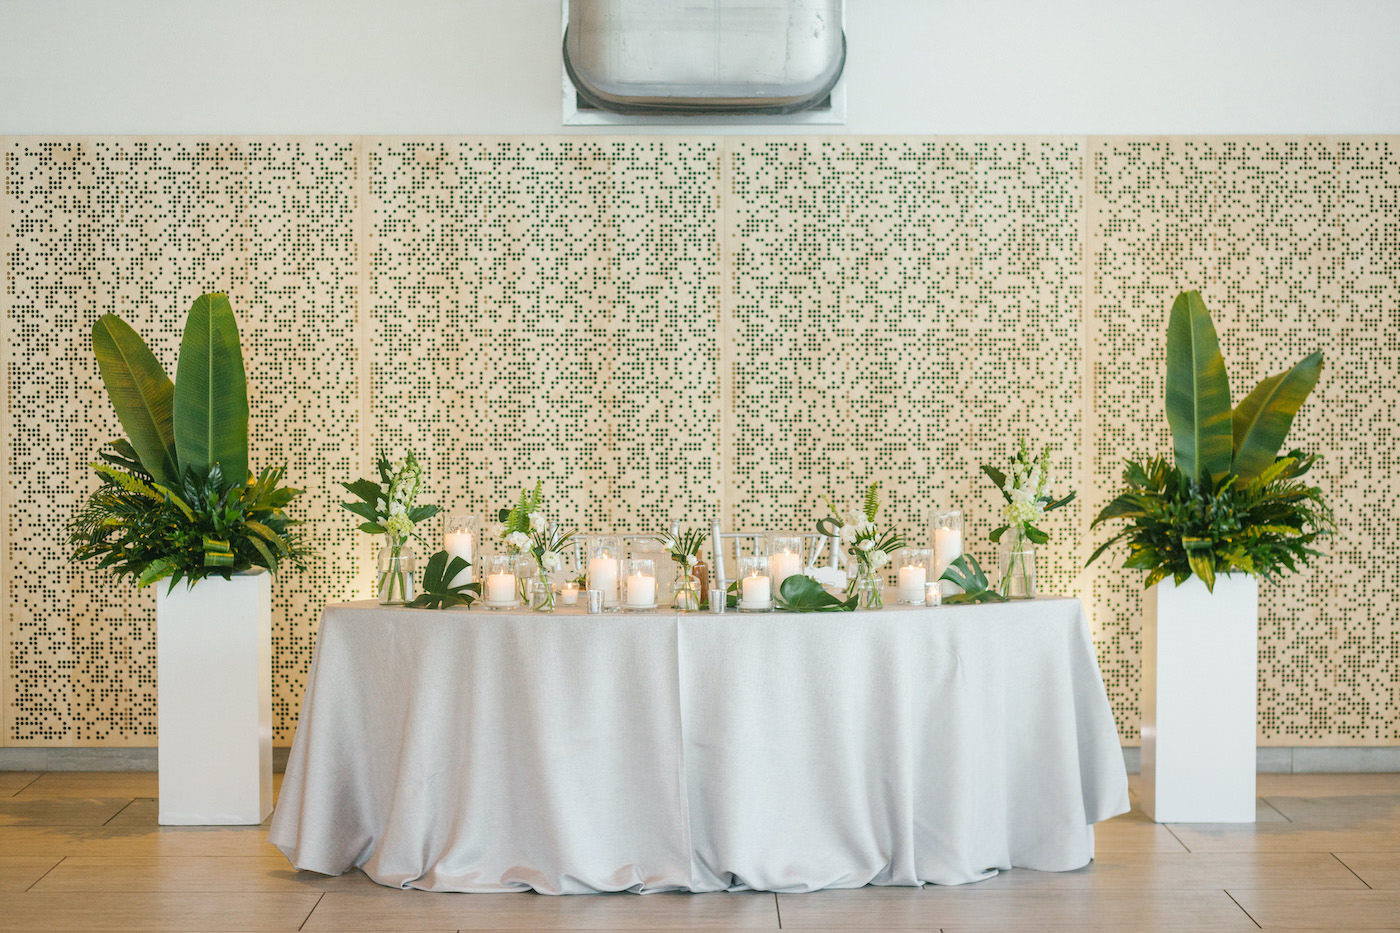 Tropical Tampa Florida Wedding Reception | Wedding Sweetheart Table with Tropical Palm Leaf Centerpiece with White Orchids and Candles and Bud Vases | Tampa Wedding Florist Bruce Wayne Florals